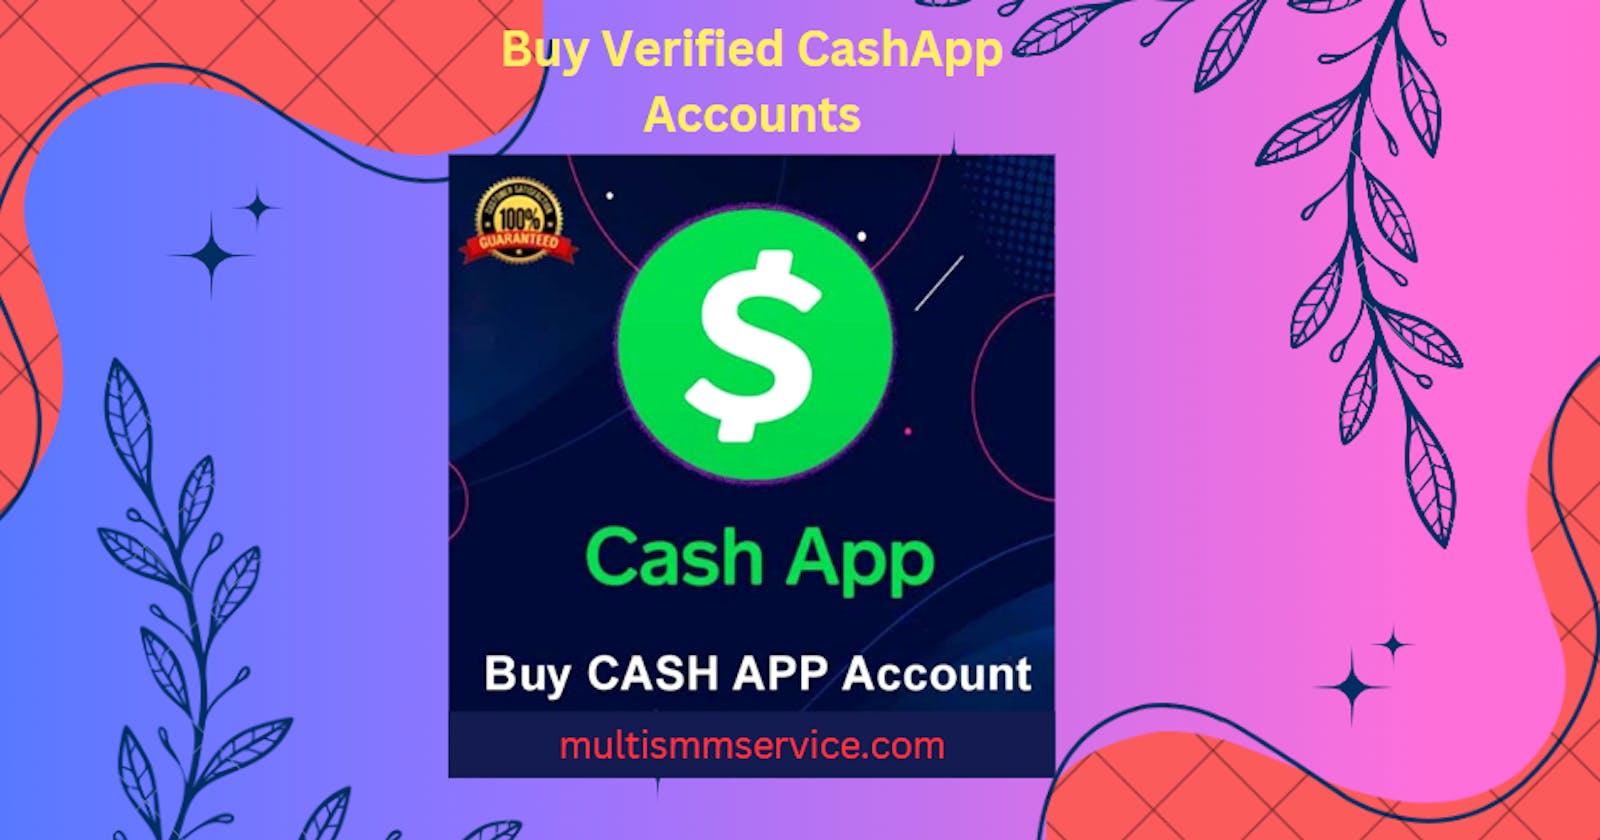 Step-By-Step Process Of Acquiring Verified Cashapp Accounts